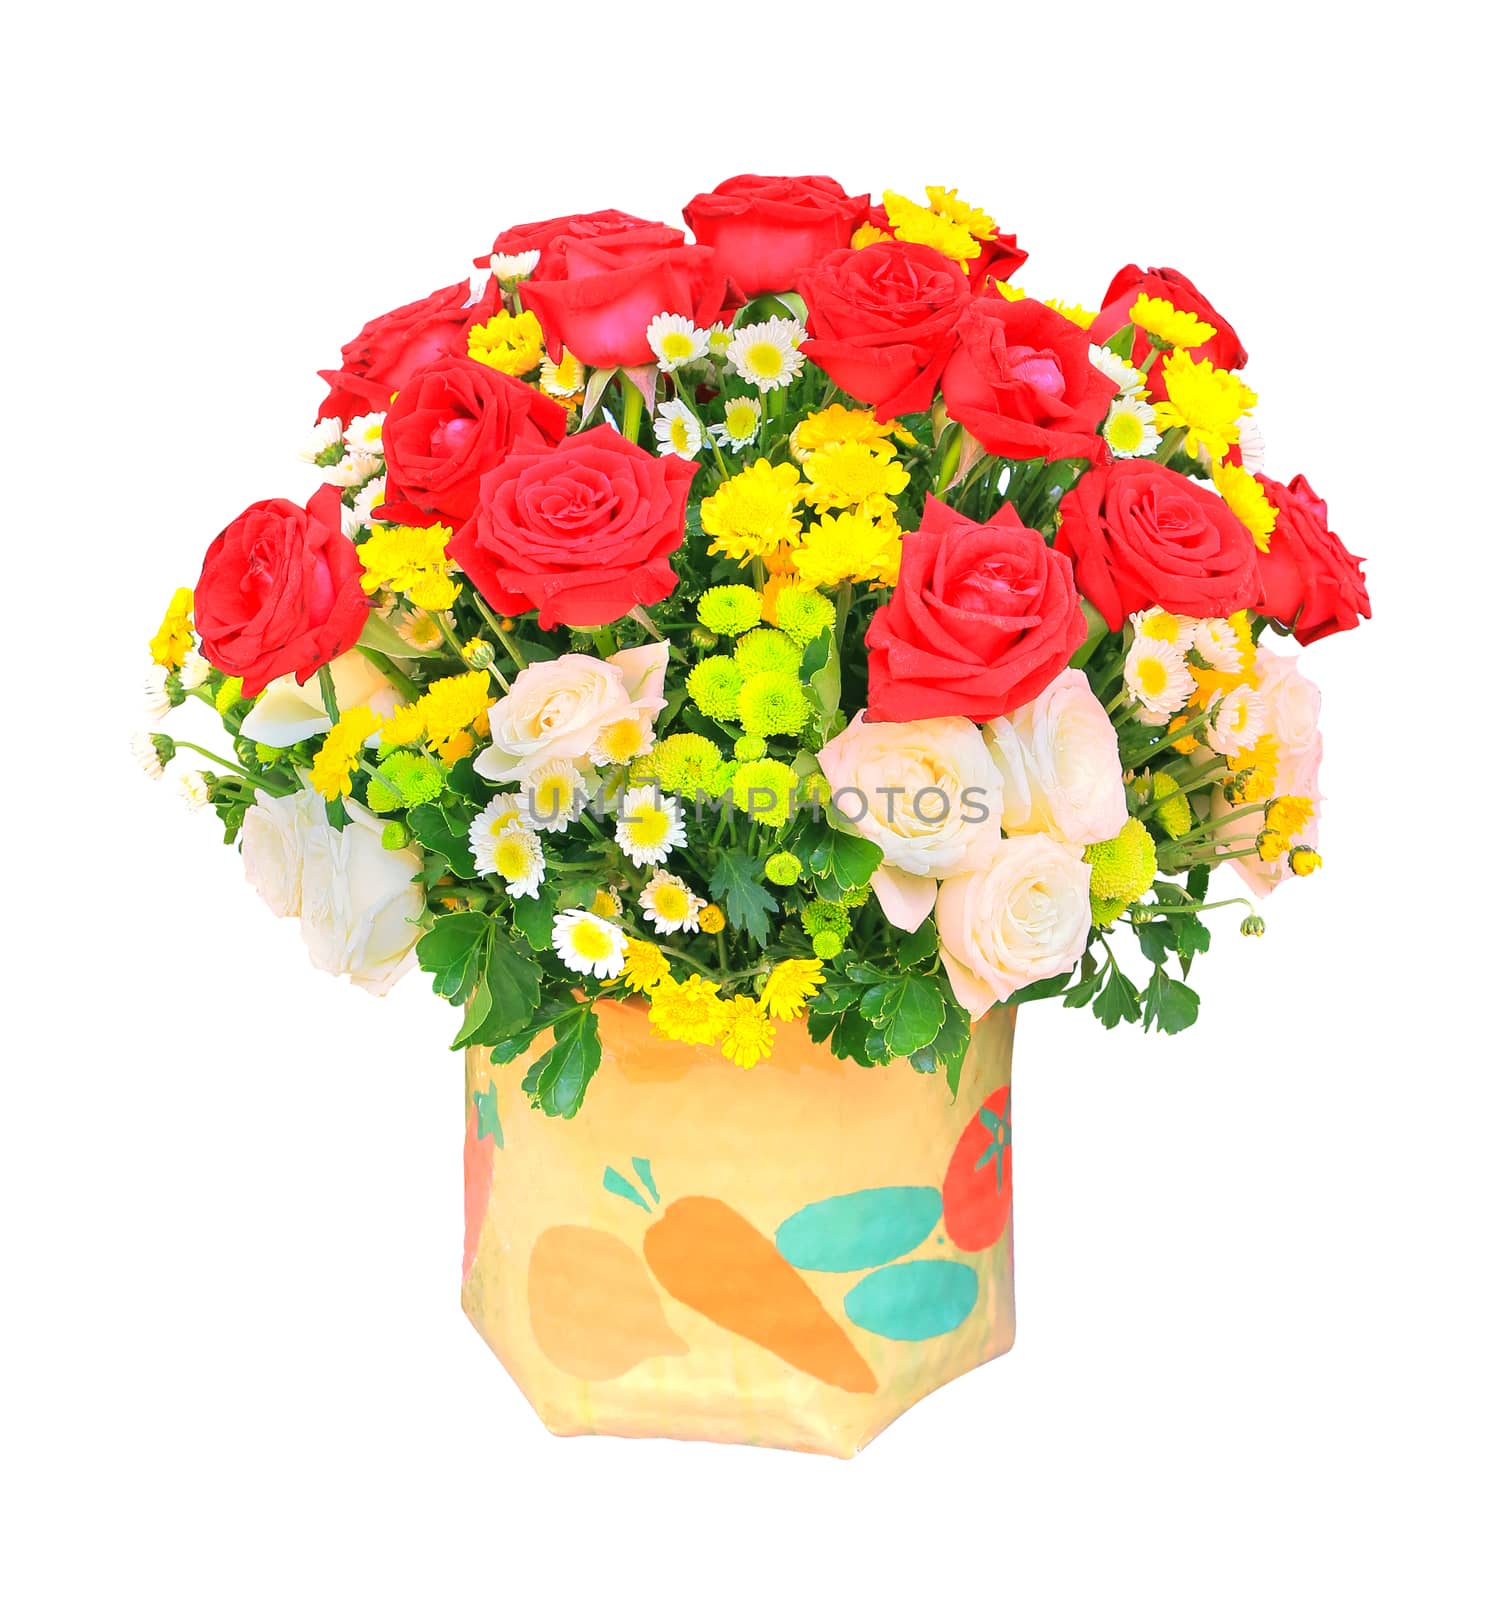 red and white roses flowers bouquet and yellow tulip in bucket isolated white background use for home decoration 